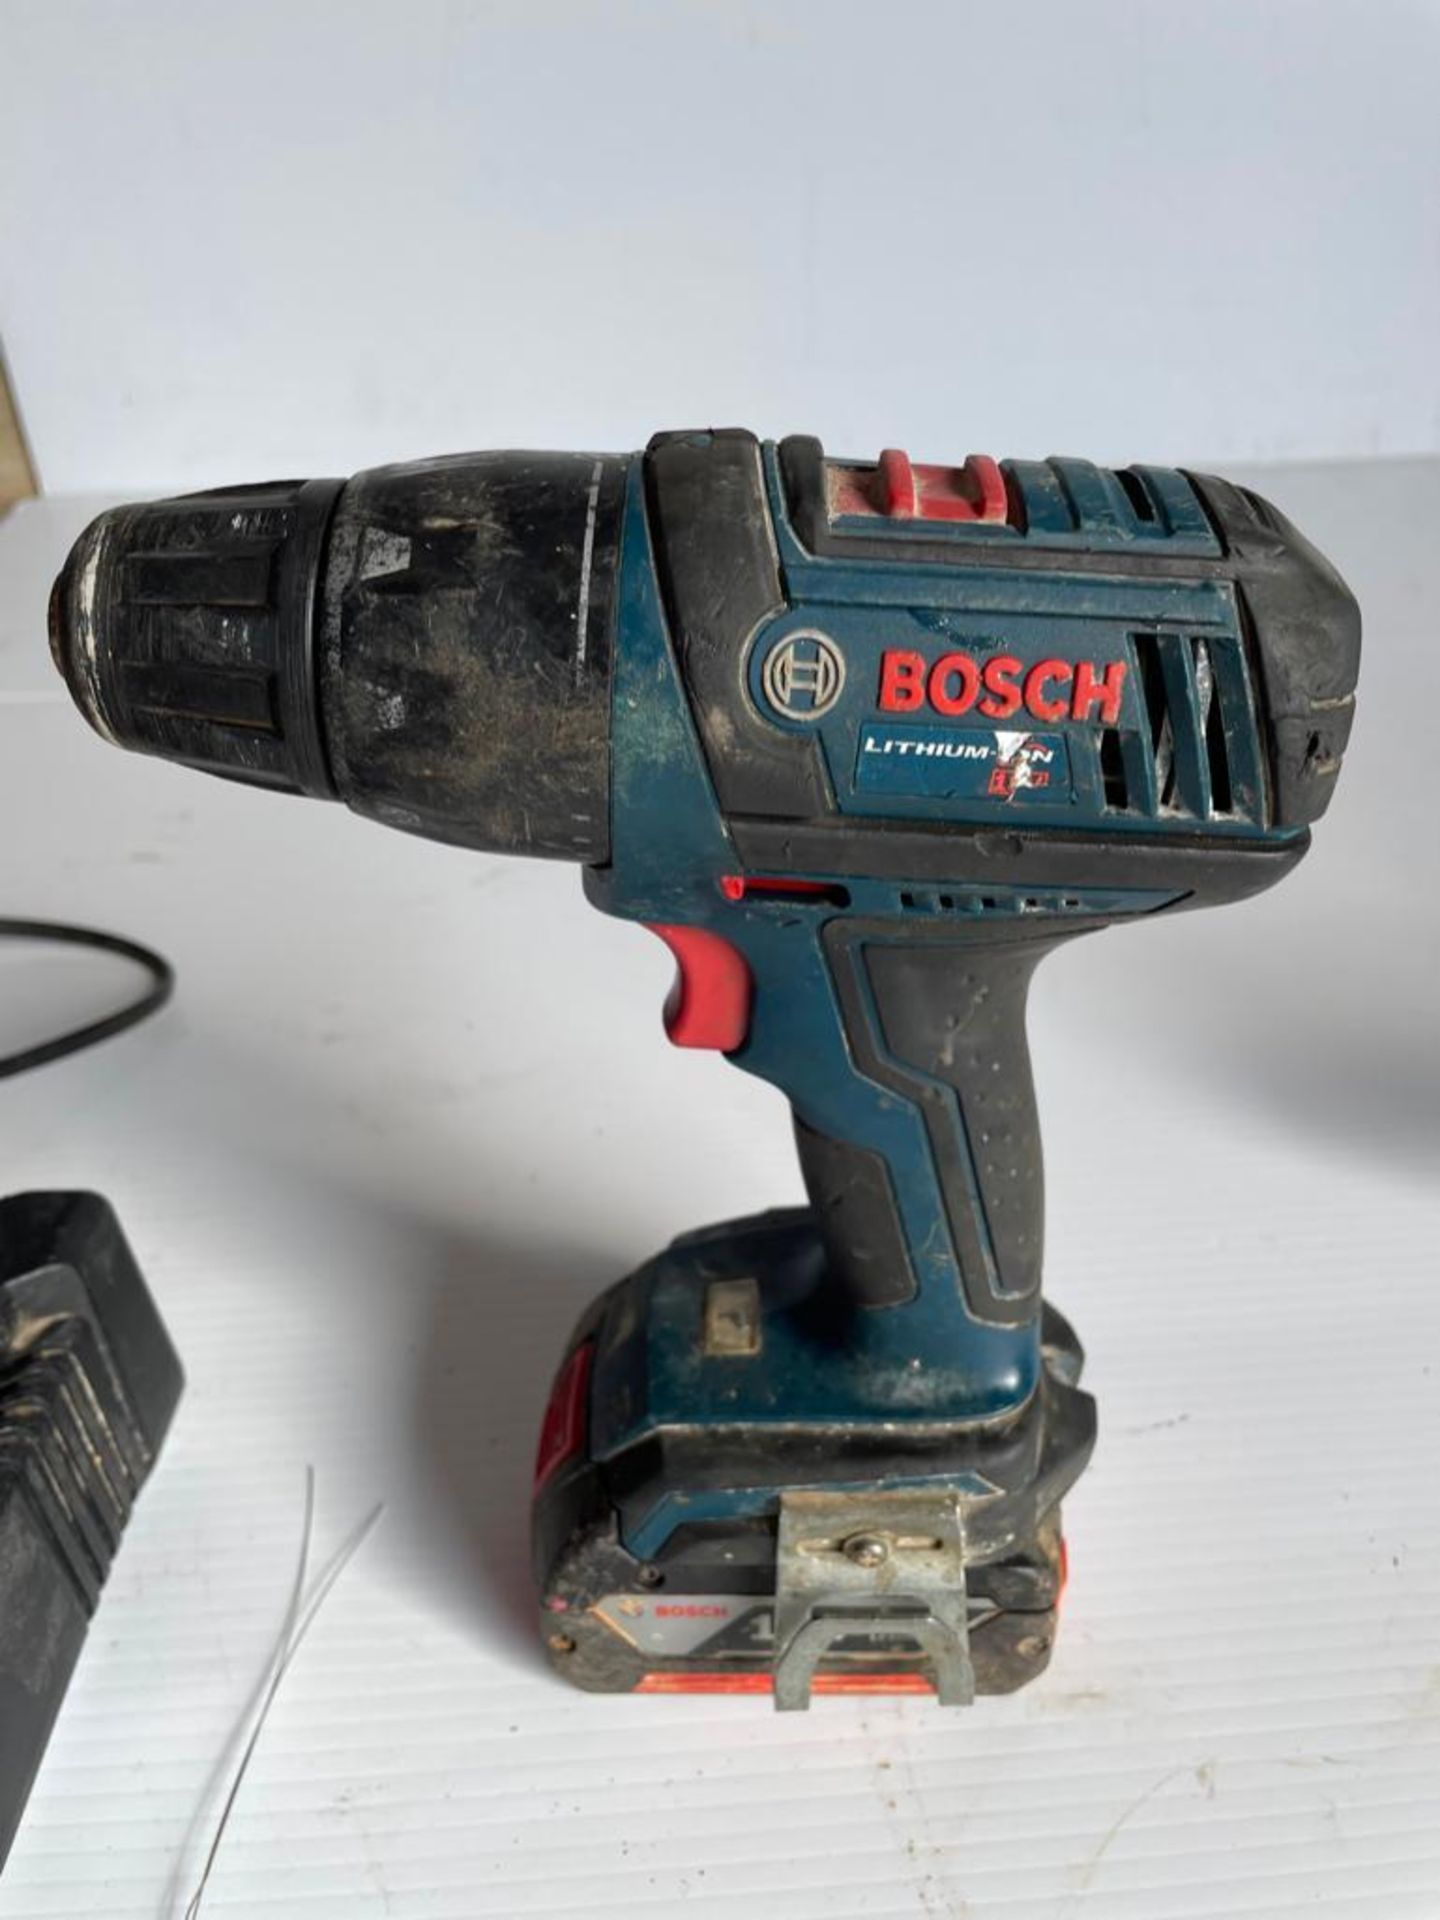 Bosch Lithium 18V Drill. Located in Hazelwood, MO - Image 2 of 6